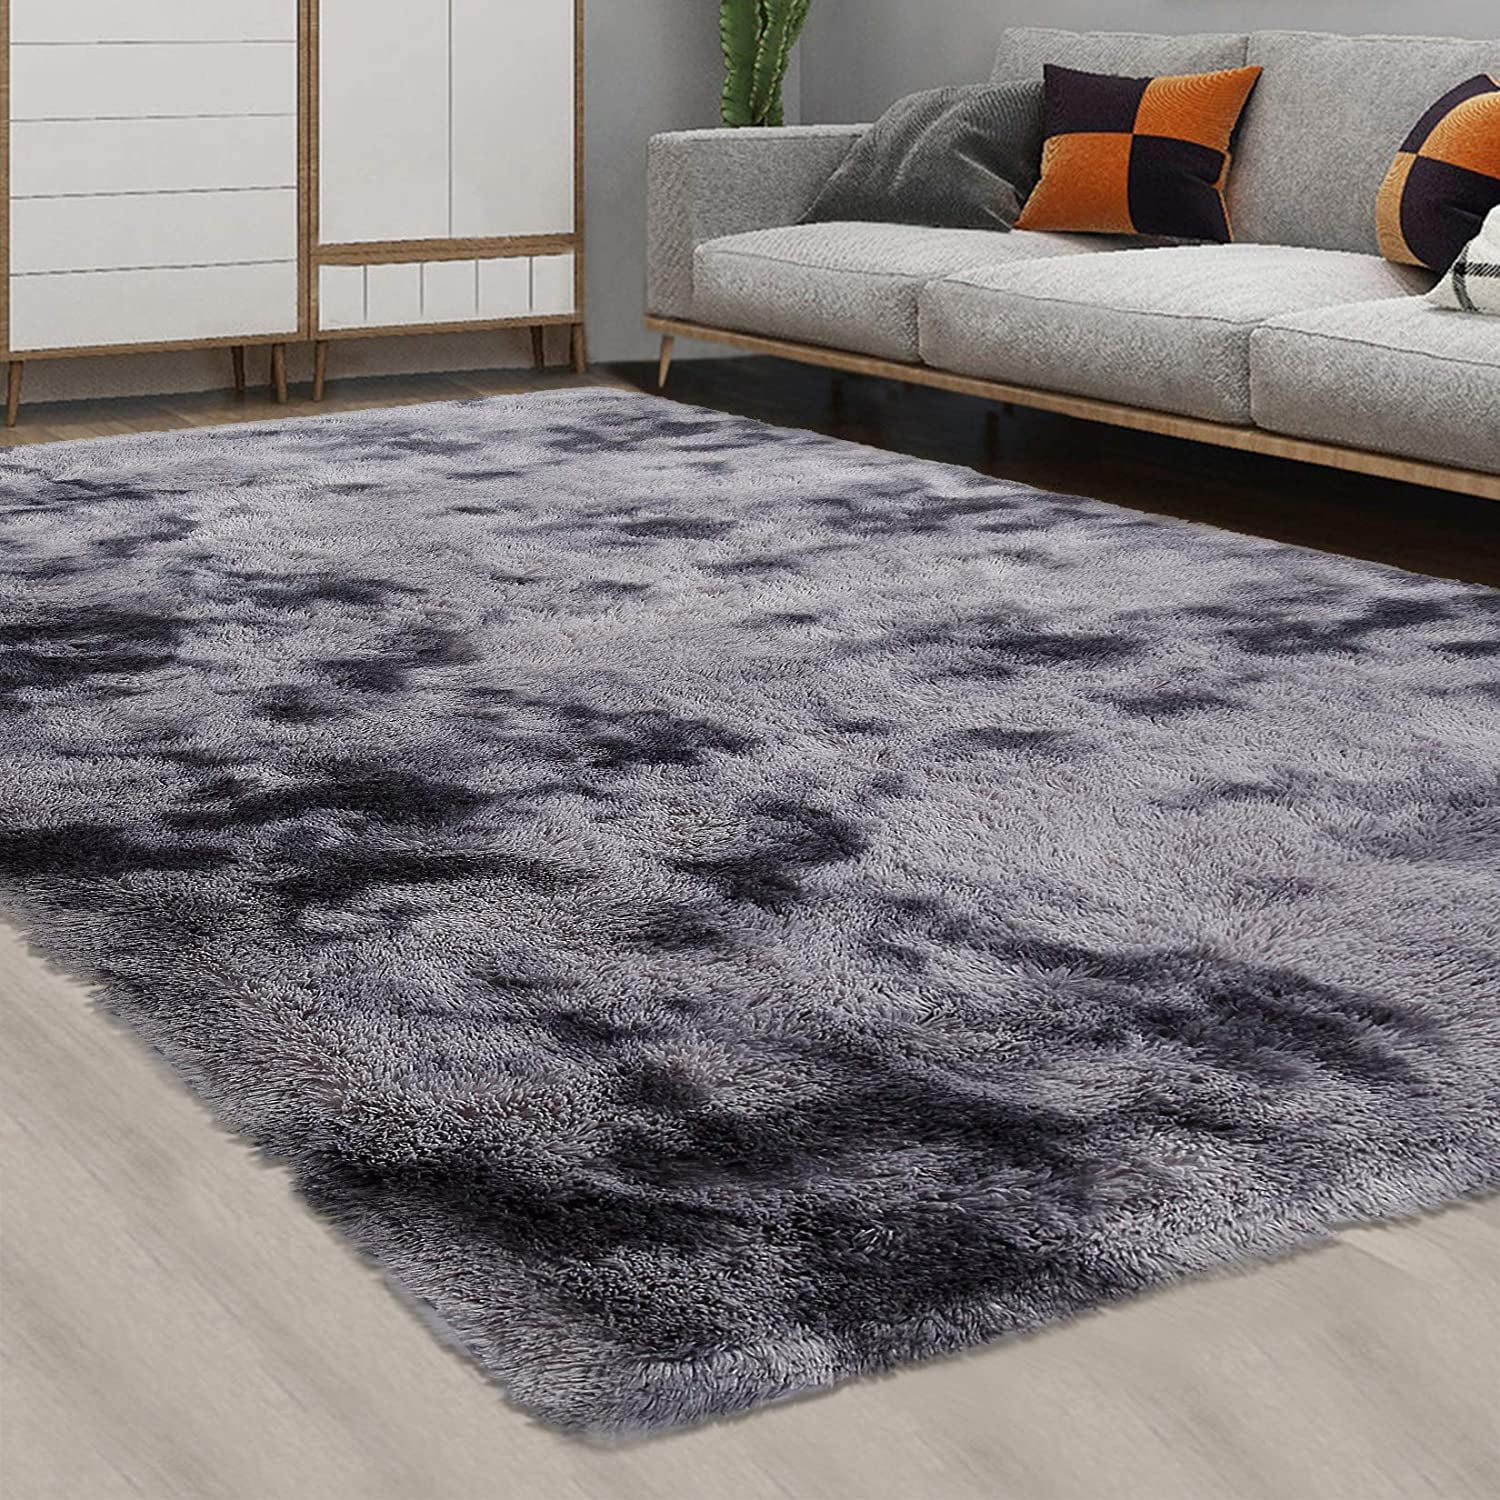  Ophanie 8x10 Area Rugs for Living Room, Large Shag Bedroom  Carpet, Tie-Dyed Grey&White Big Indoor Thick Soft Nursery Rug, Fluffy  Carpets for Boy and Girls Room Dorm Home Decor Aesthetic 